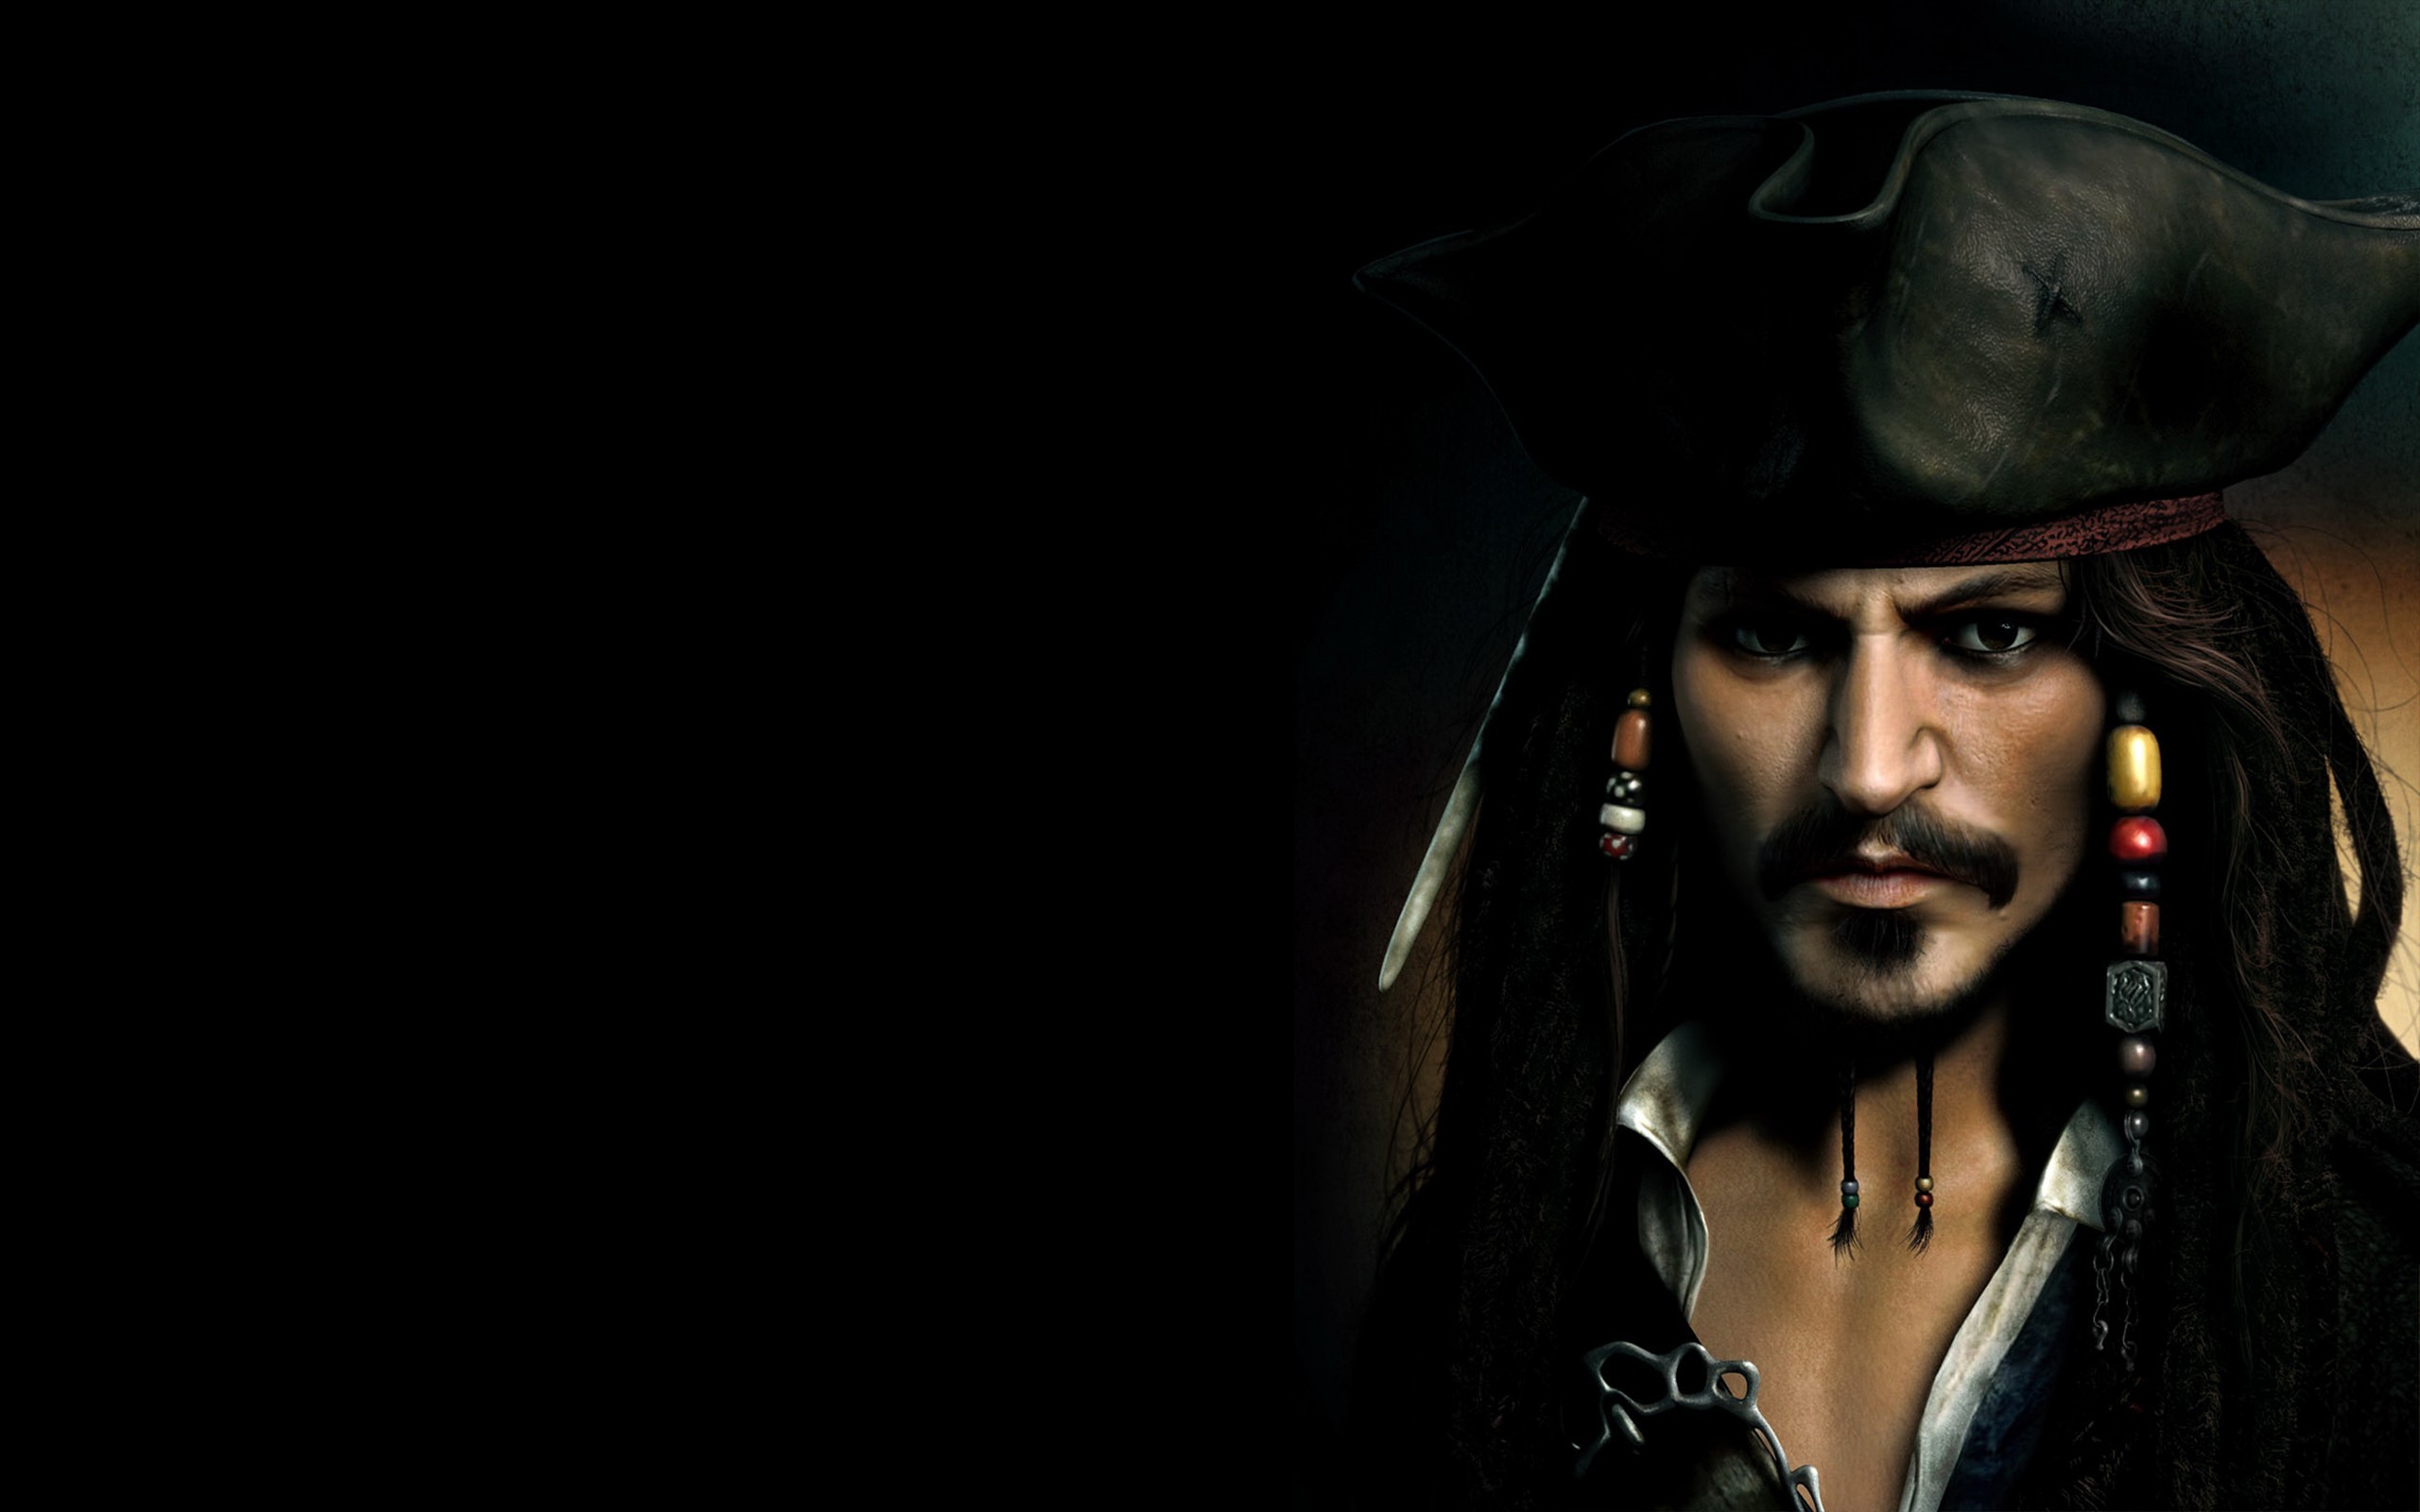 2560x1600 Johnny Depp HD Wallpapers - Free download latest Johnny Depp HD Wallpapers  for Computer, Mobile, iPhone, iPad or any Gadget at WallpapersCharlie.co…